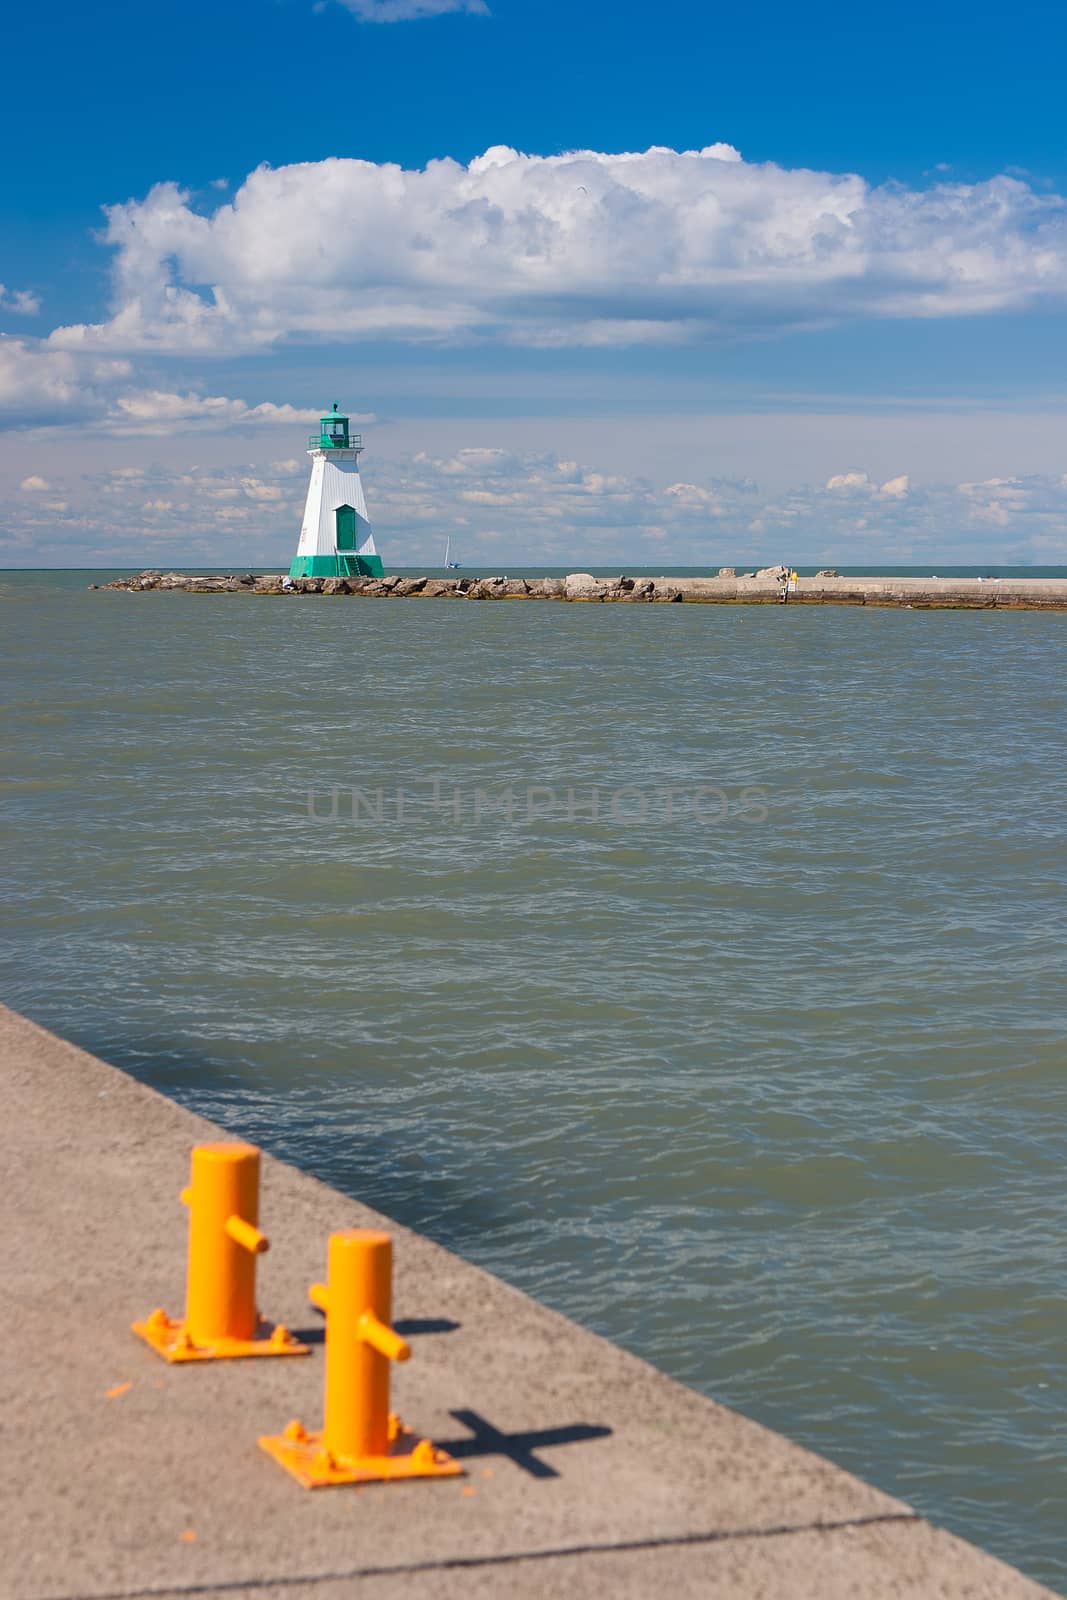 The historic lighthouse and pier in Port Dalhousie by CaptureLight